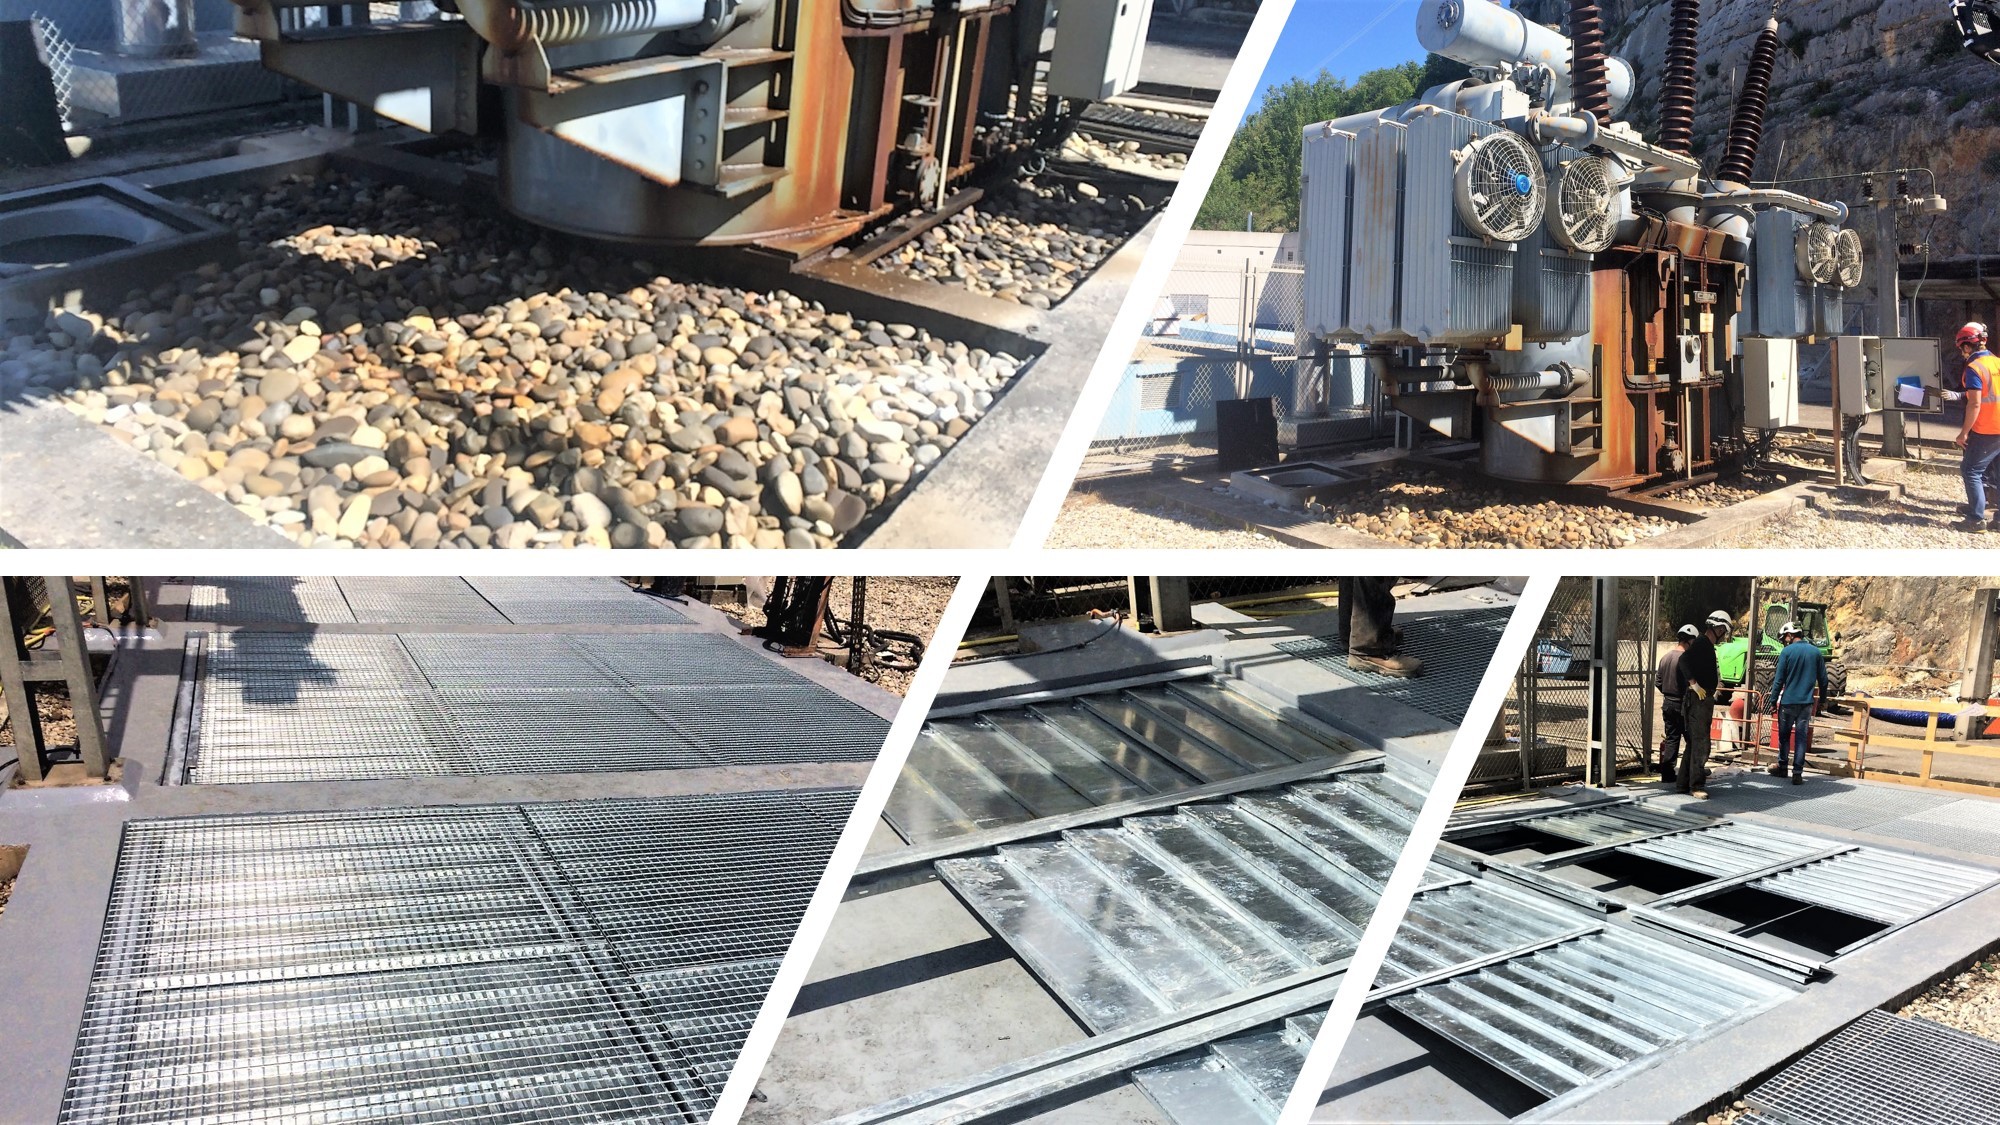 EDF transformer pit refurbishment with SANERGRID EXTICOV range: fireproof covers for oil transformer pits